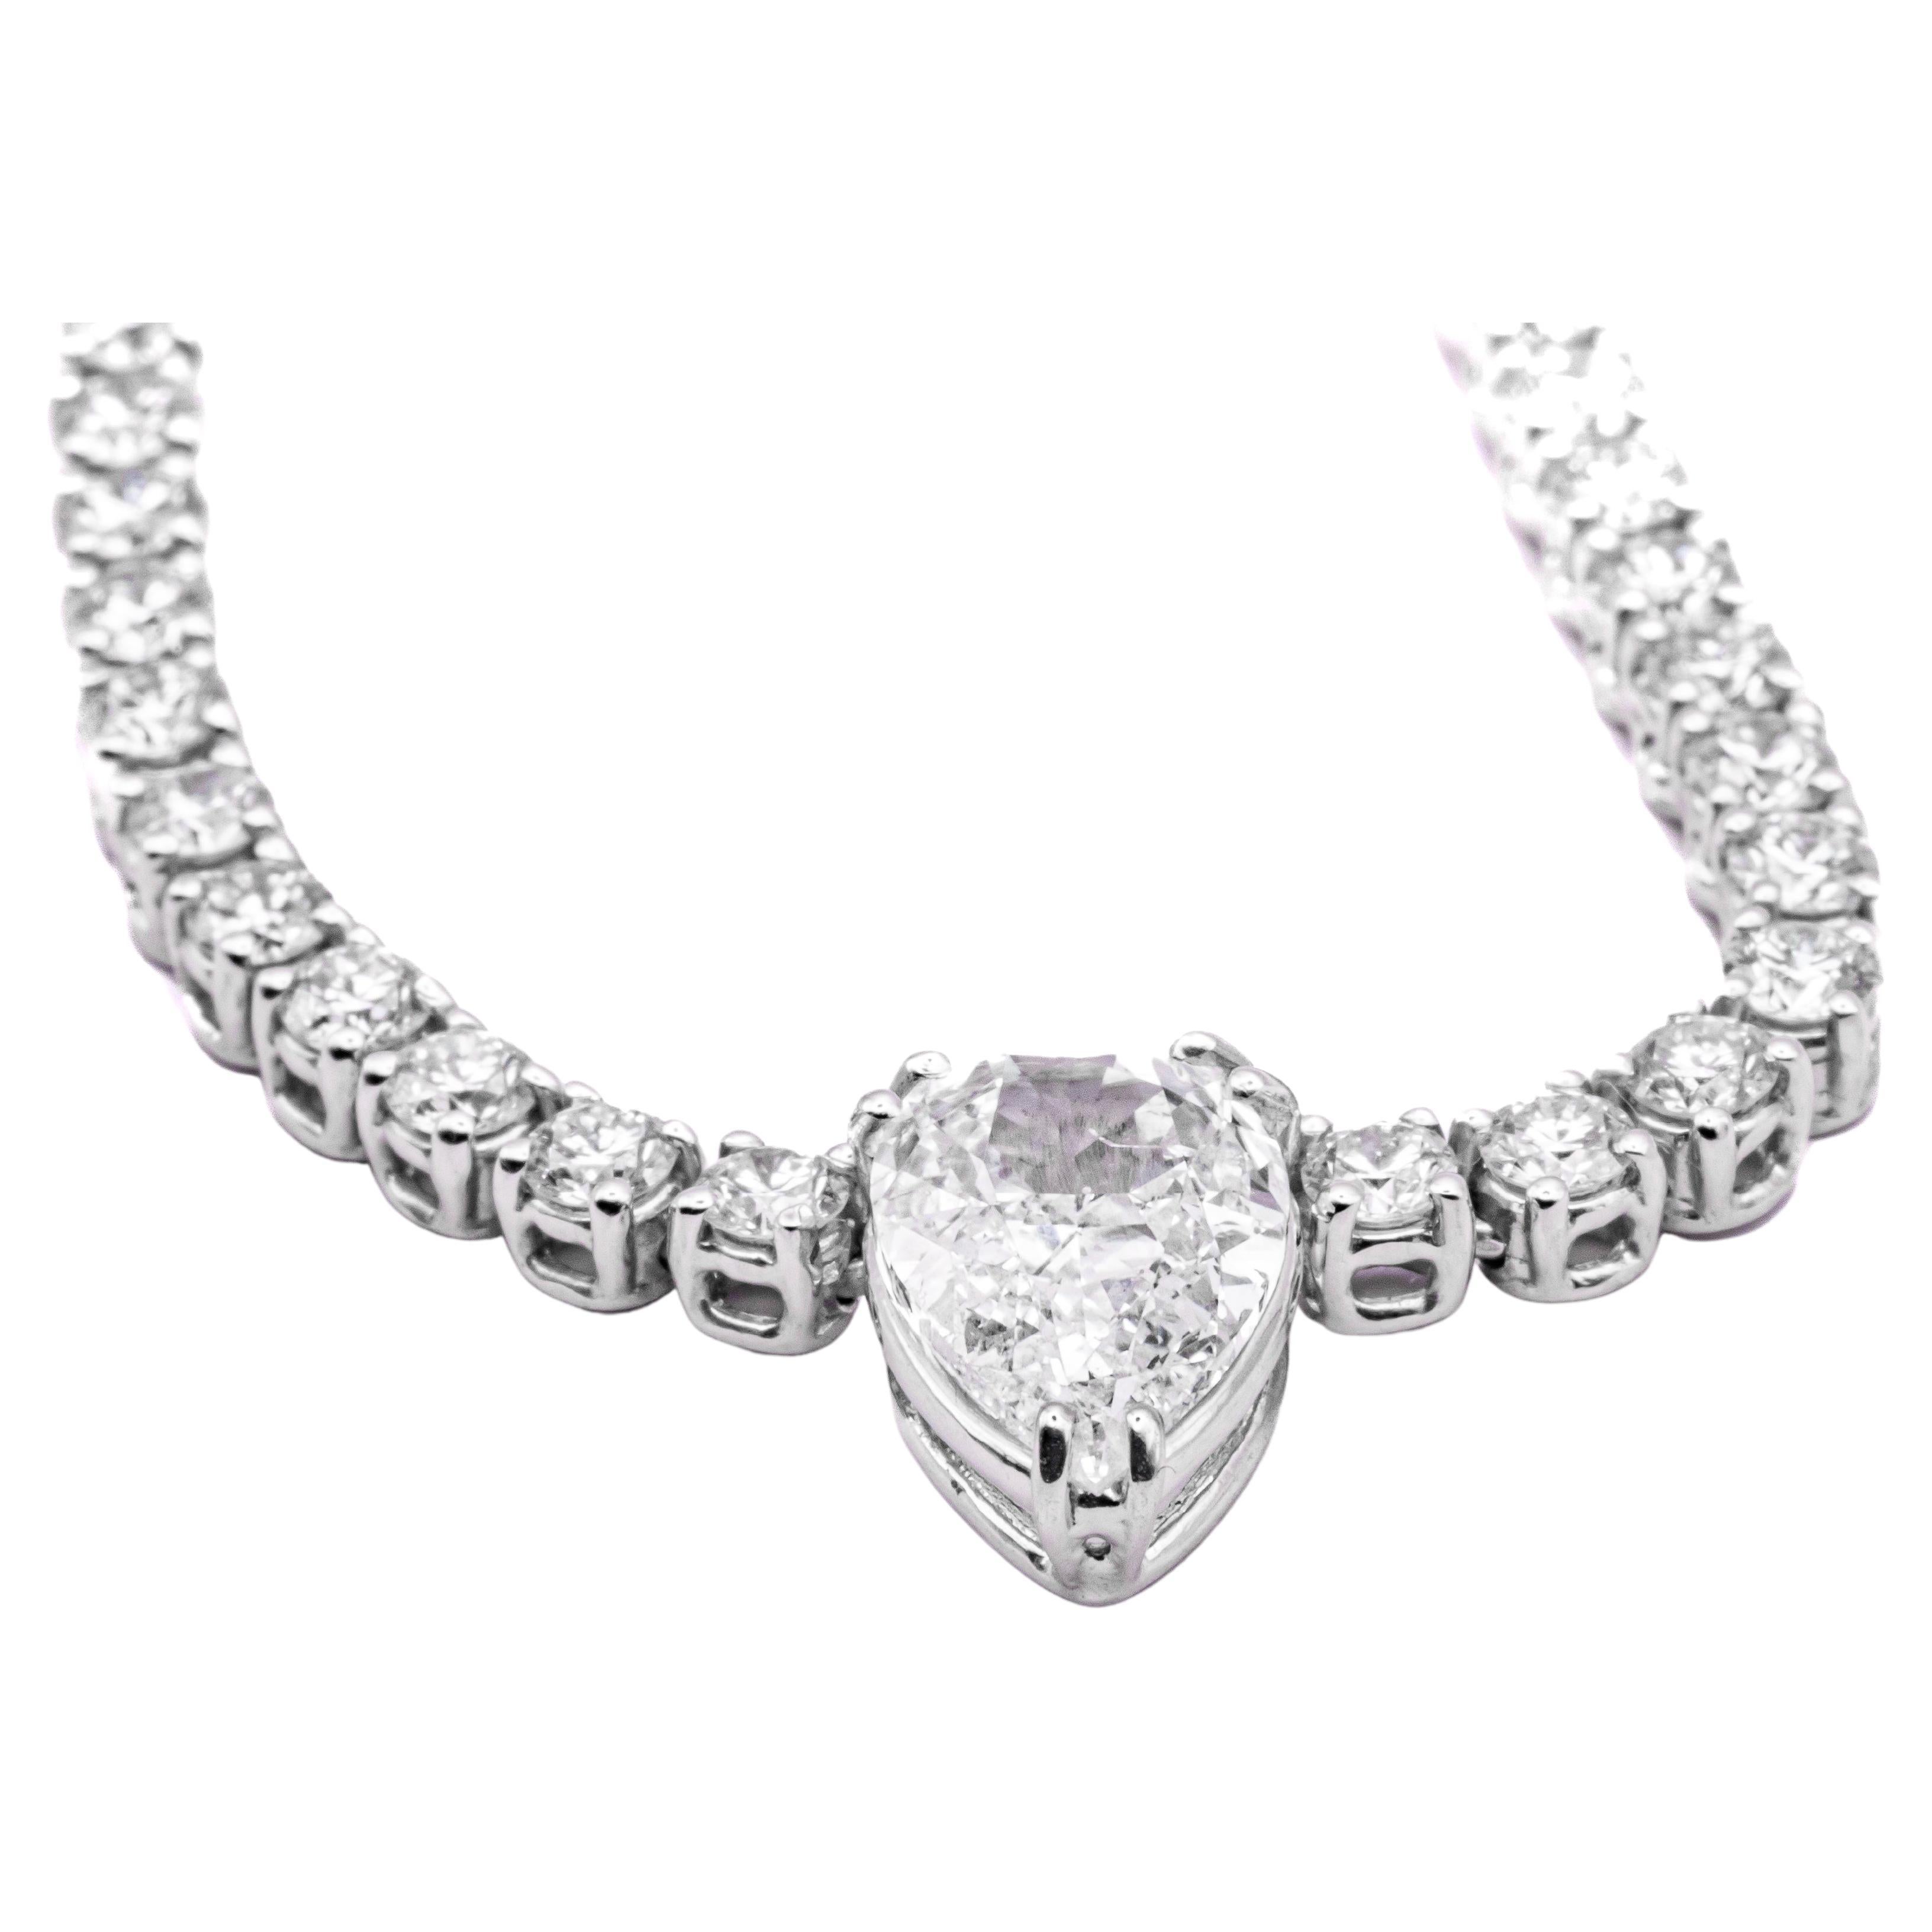 8.91 Carat VS G White Gold Tennis Necklace with Central  Diamond Carat 1, 71 For Sale